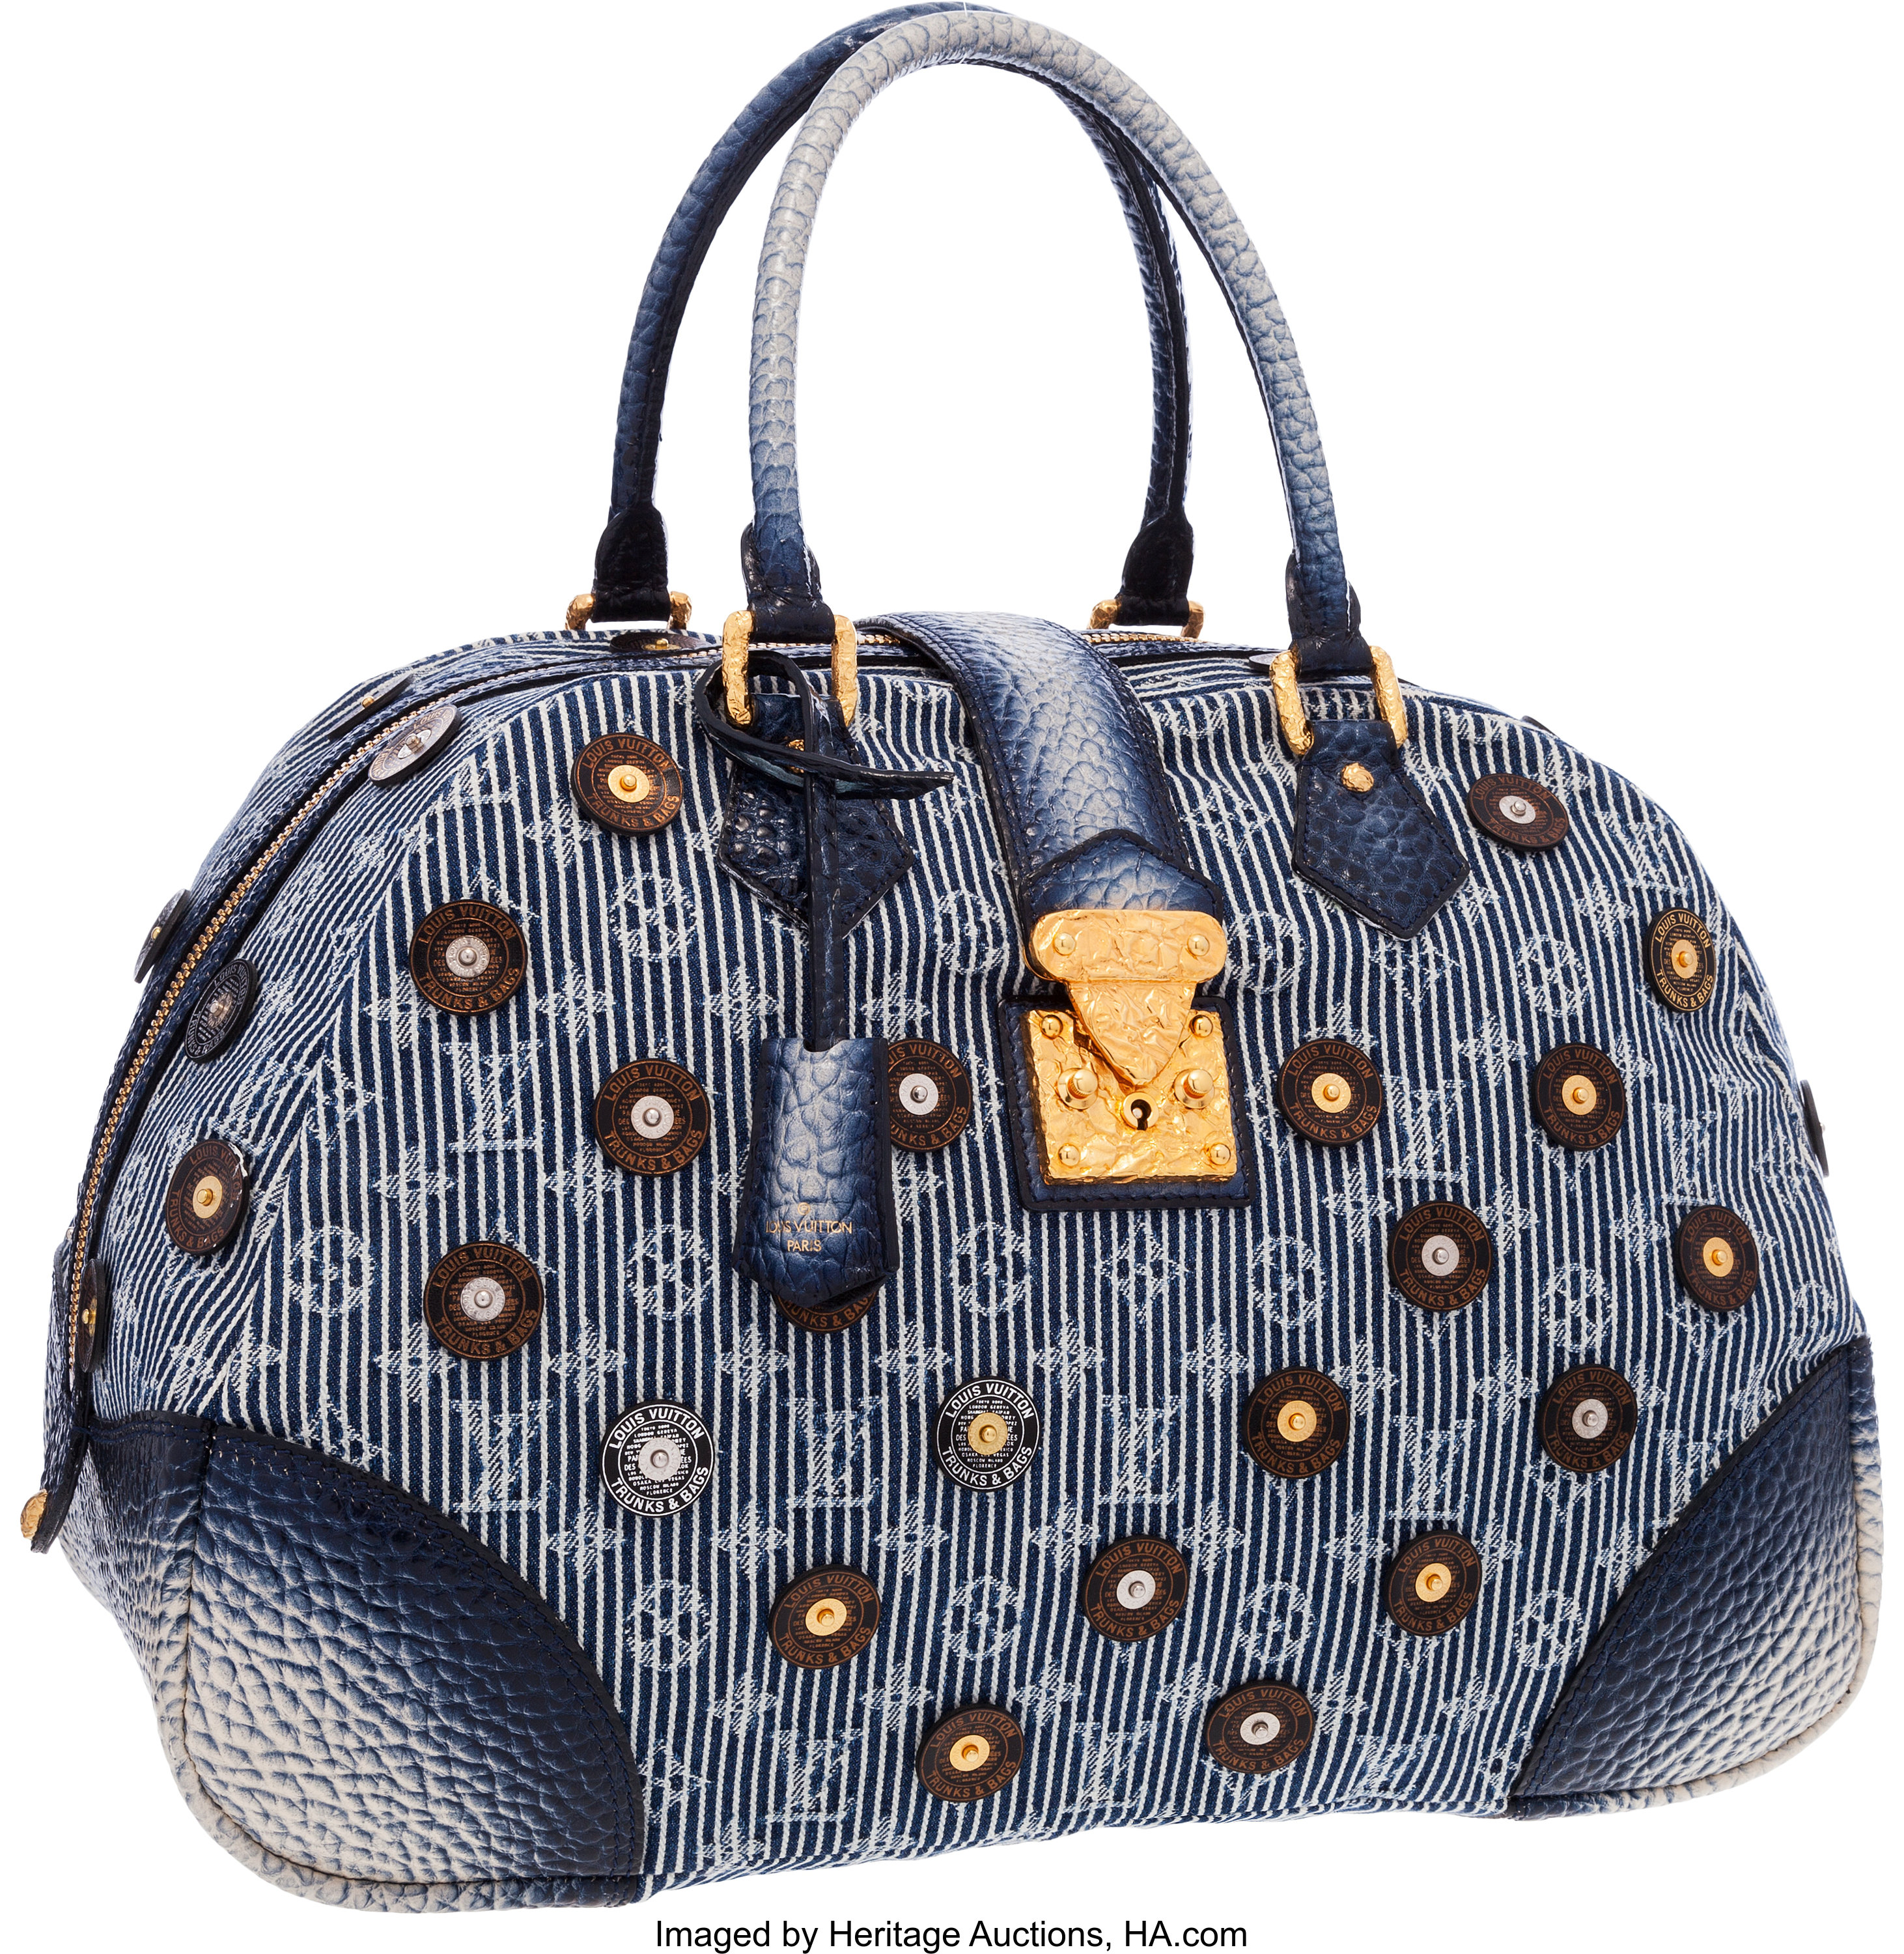 Louis Vuitton Limited Edition Blue Polka Dot Trunks & Bags Bowly